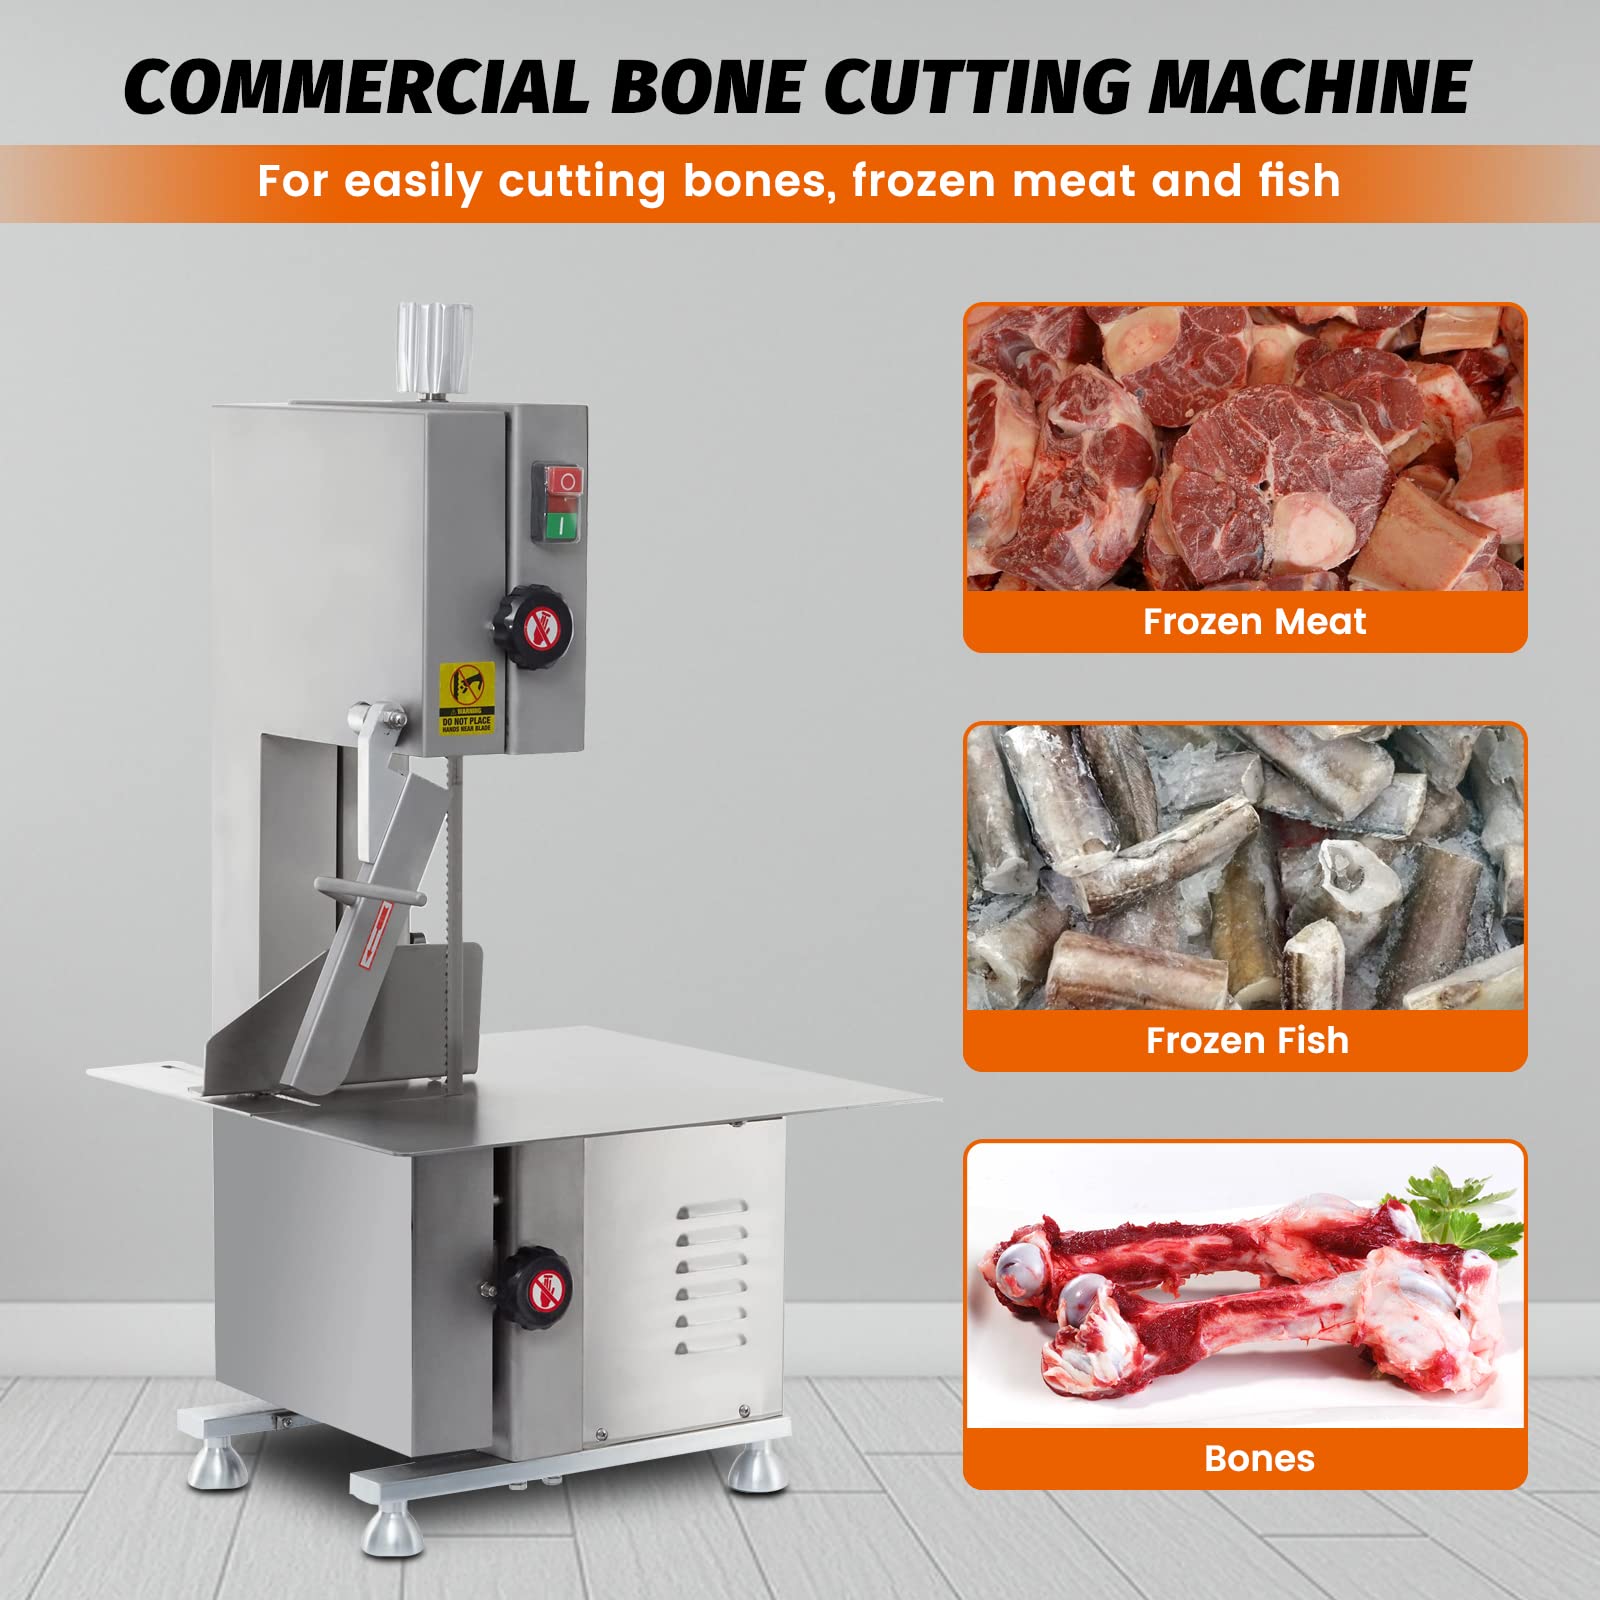 Hakka Bone Saw Machine, Electric Butcher Bandsaw Countertop Meat Saw Commercial Bone Cutter Stainless Steel,1HP/120V